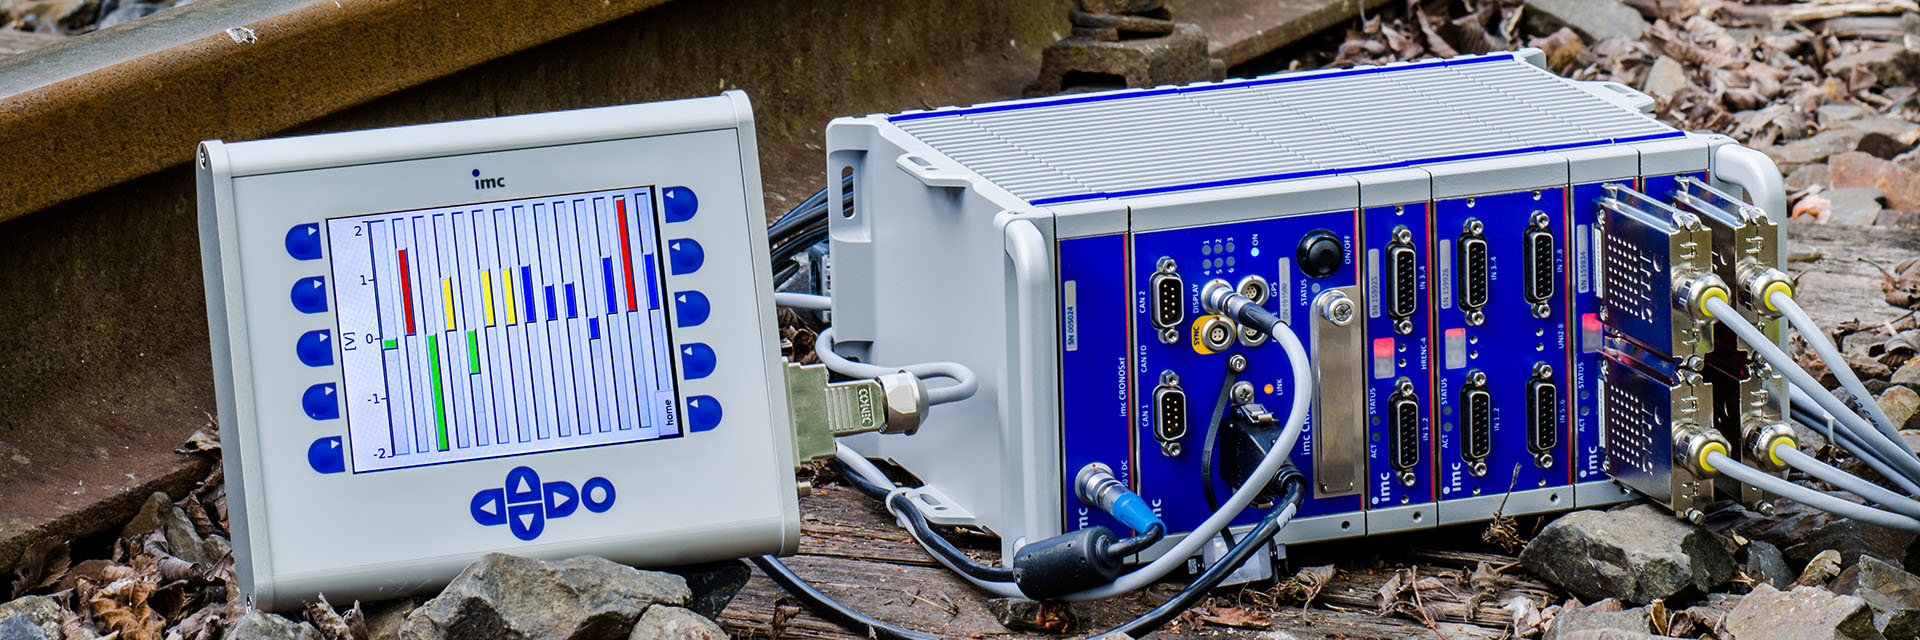 Rugged data acquisition system in harsh environment